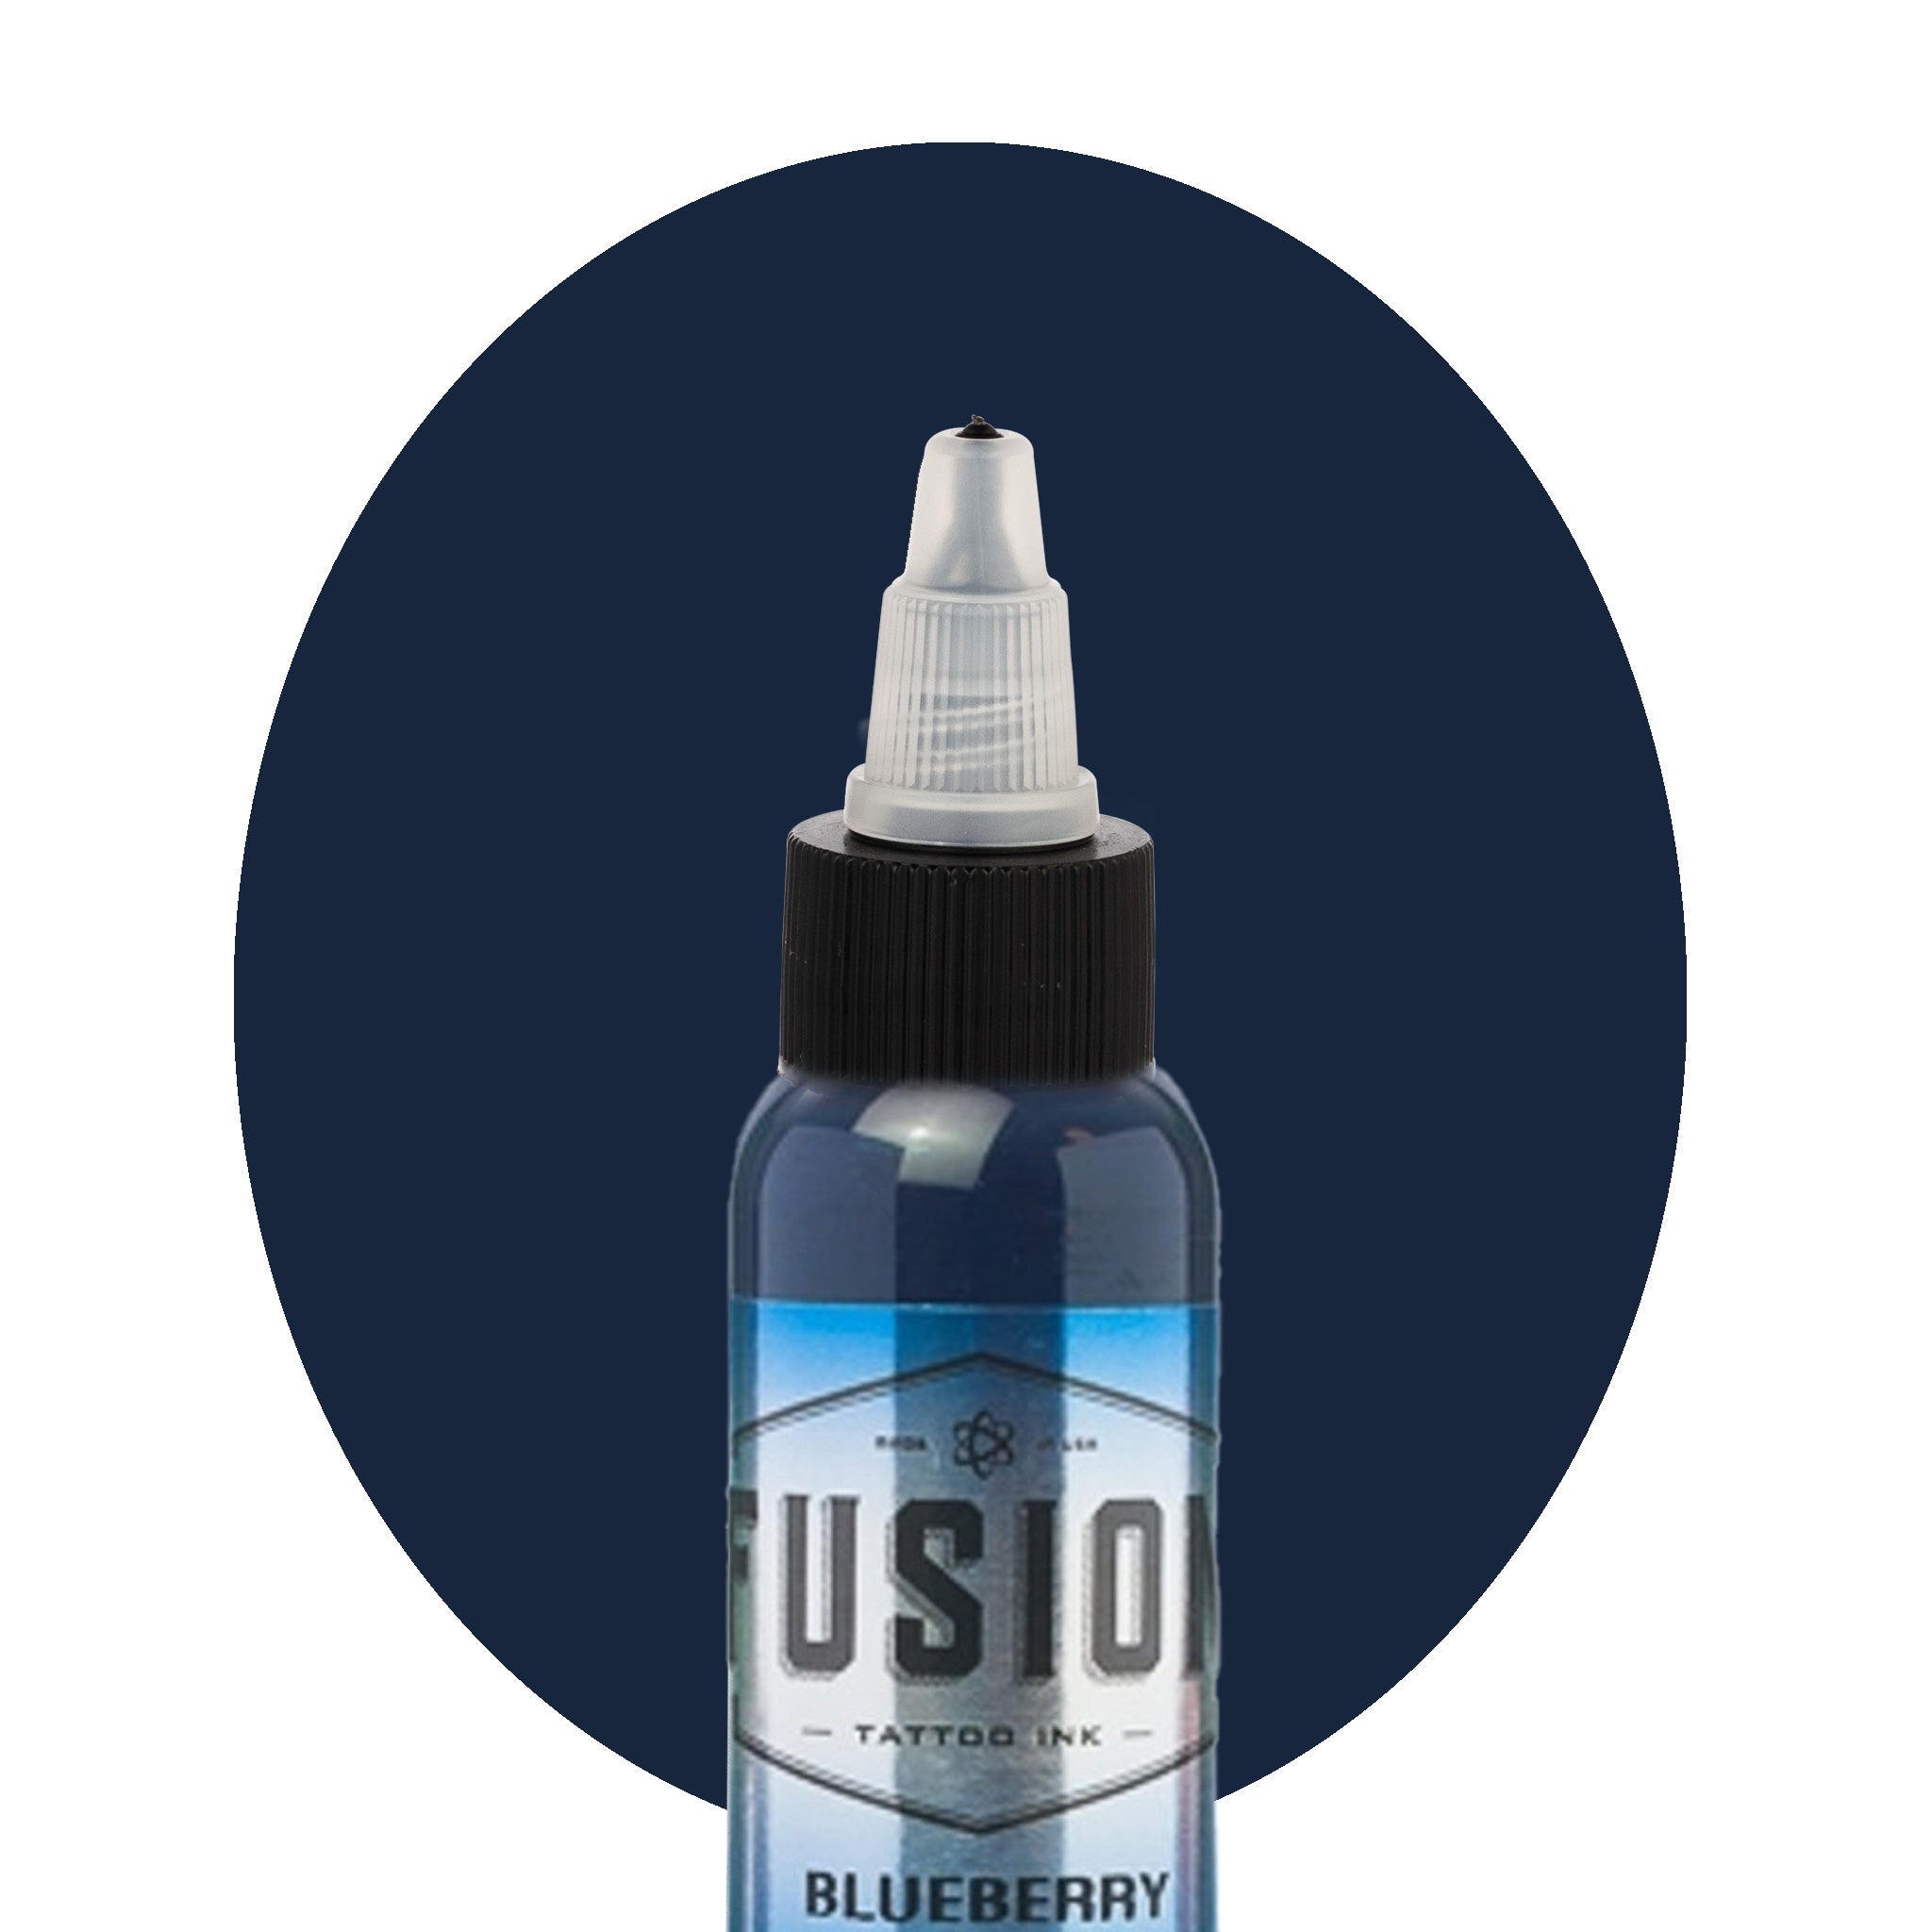 Fusion Blueberry Tattoo Ink 2 oz.